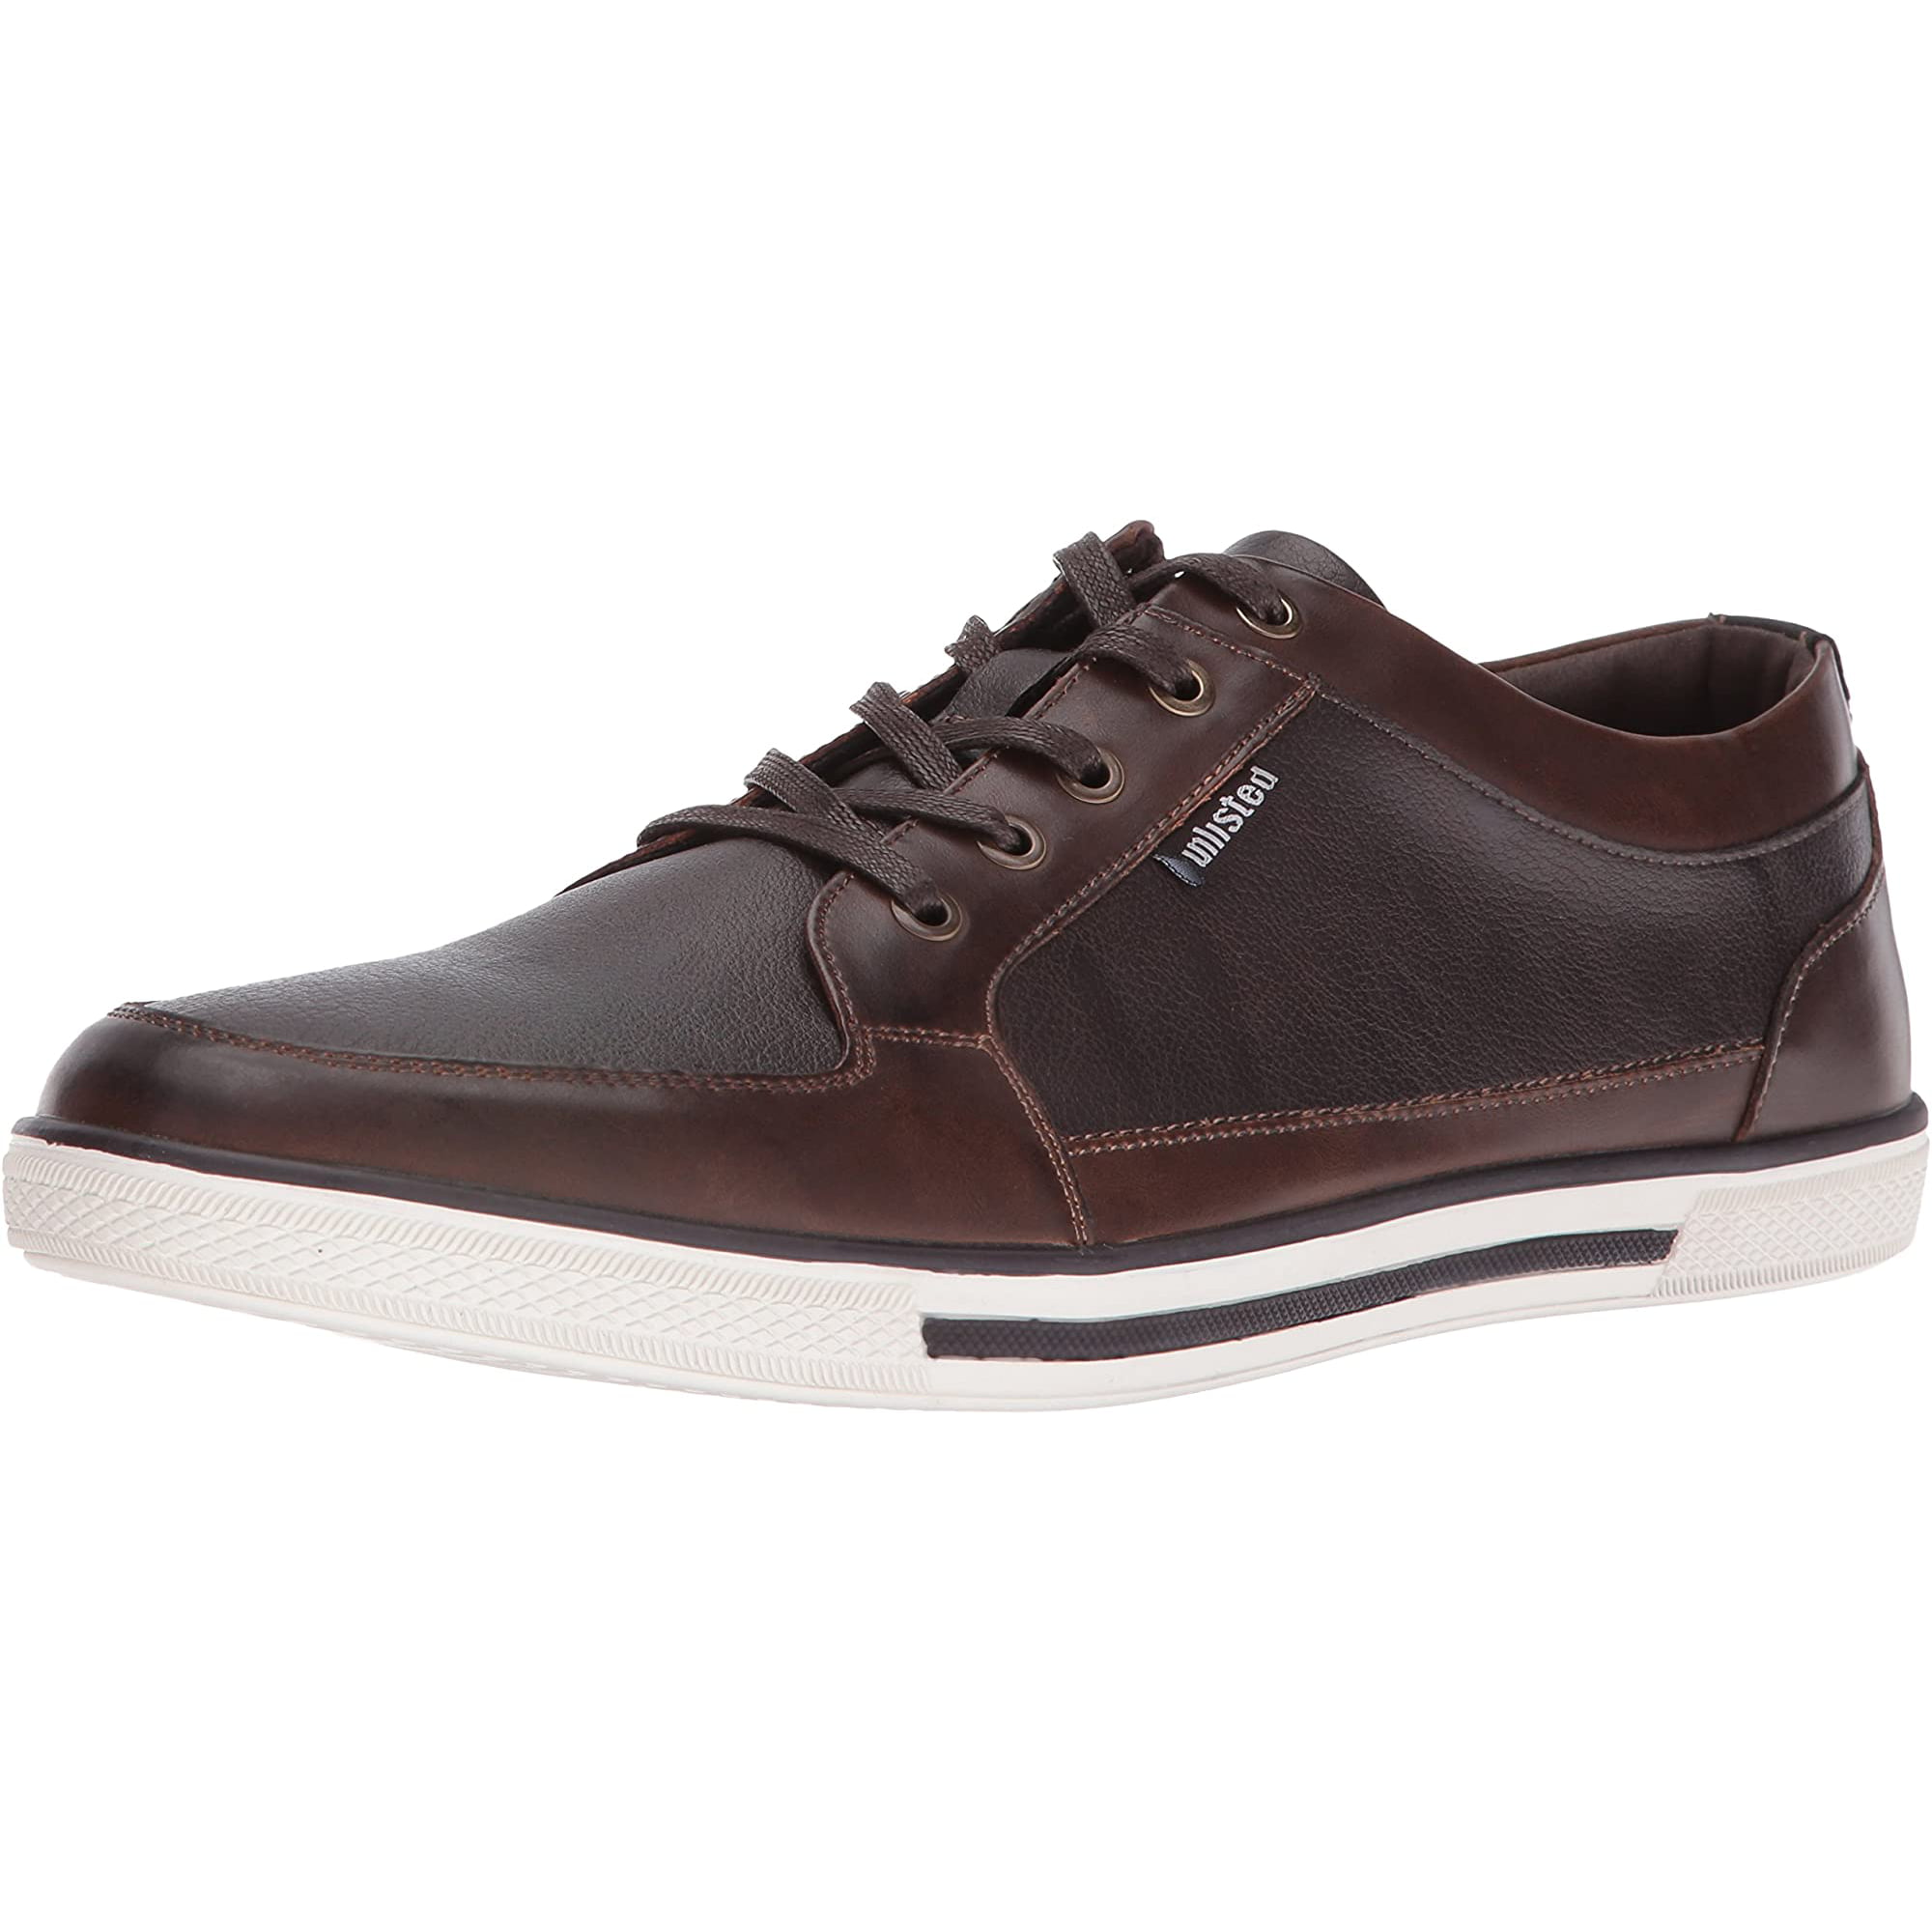 Unlisted by Kenneth Cole Mens Crown Prince Fashion Sneaker Shoes | Walmart  Canada